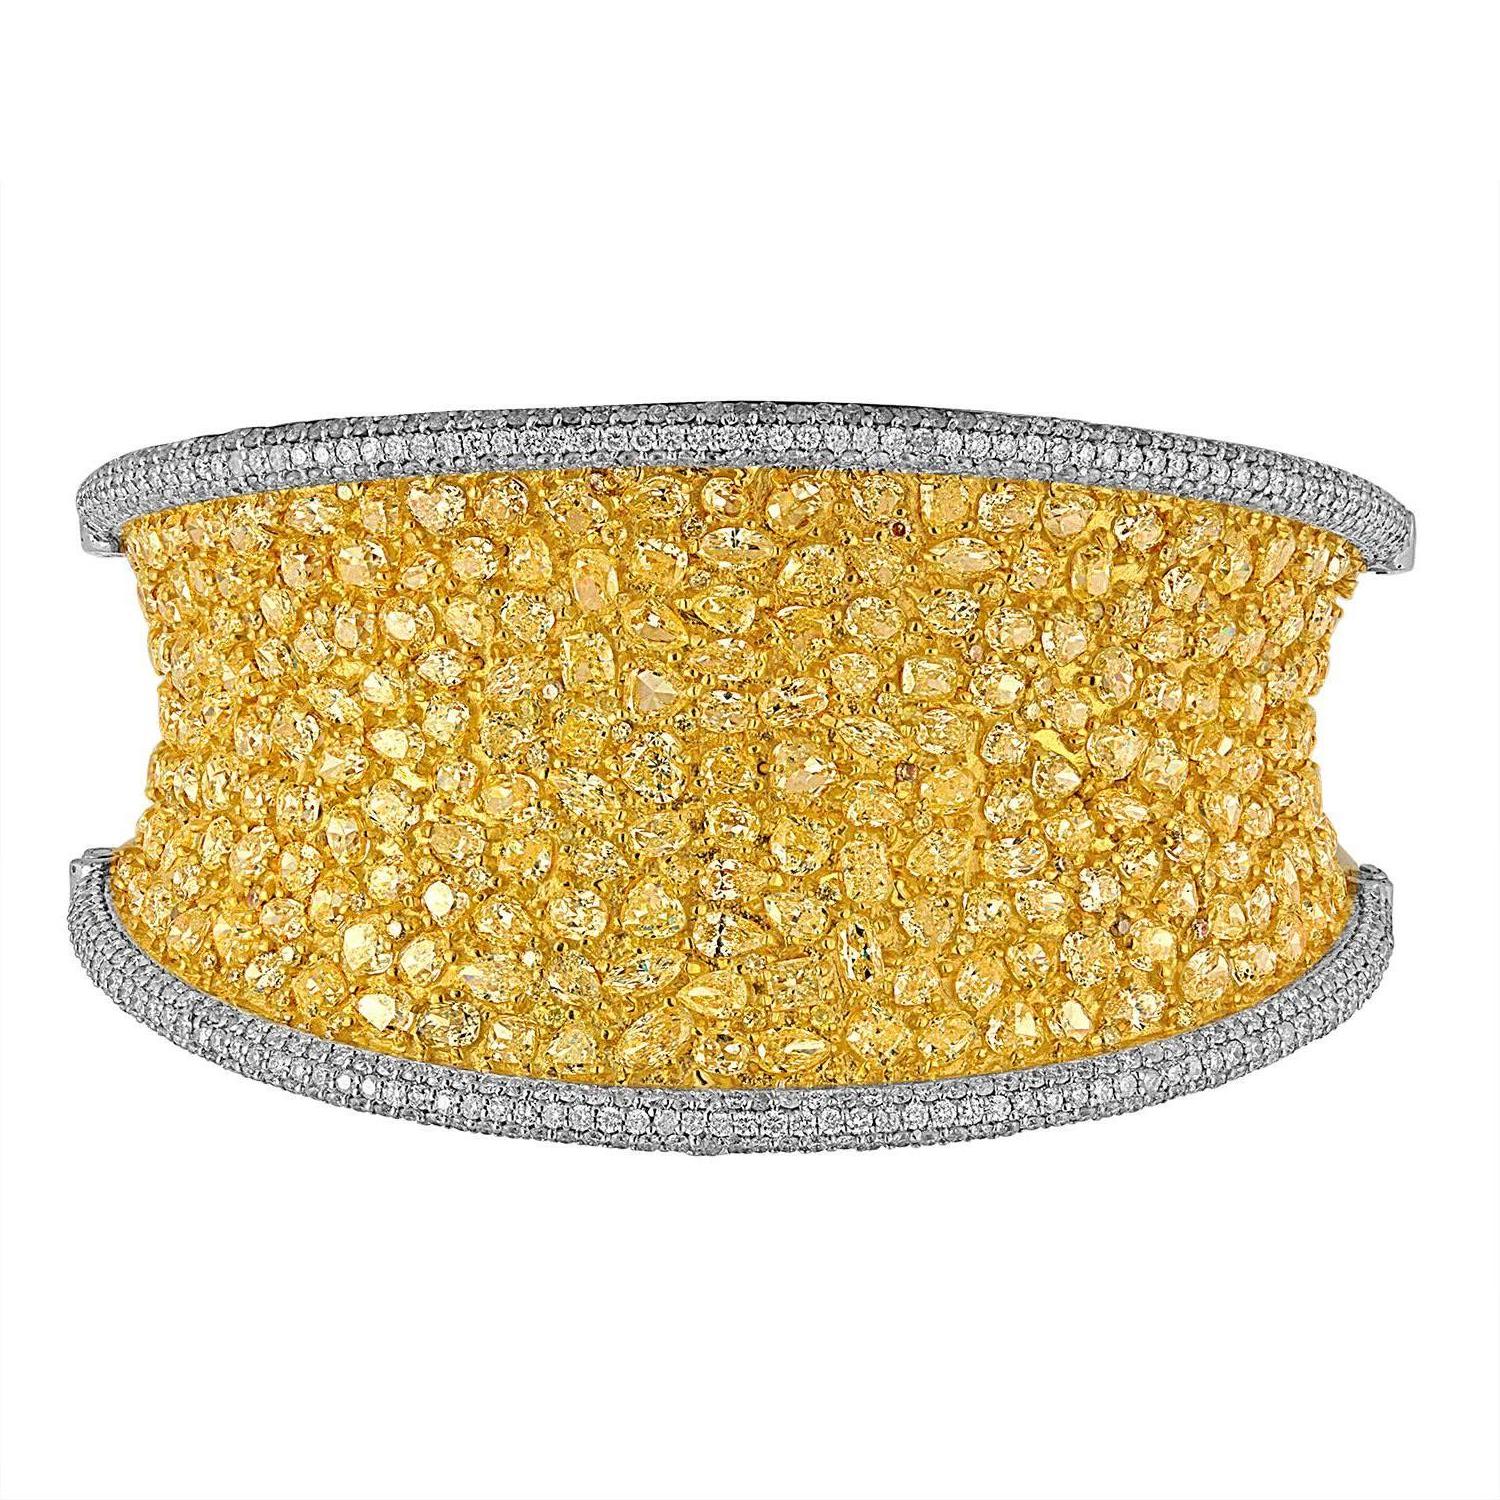 200 Fancy Shaped Yellow Diamonds are set in Yellow Gold with White Melee.
The approximate 1.5